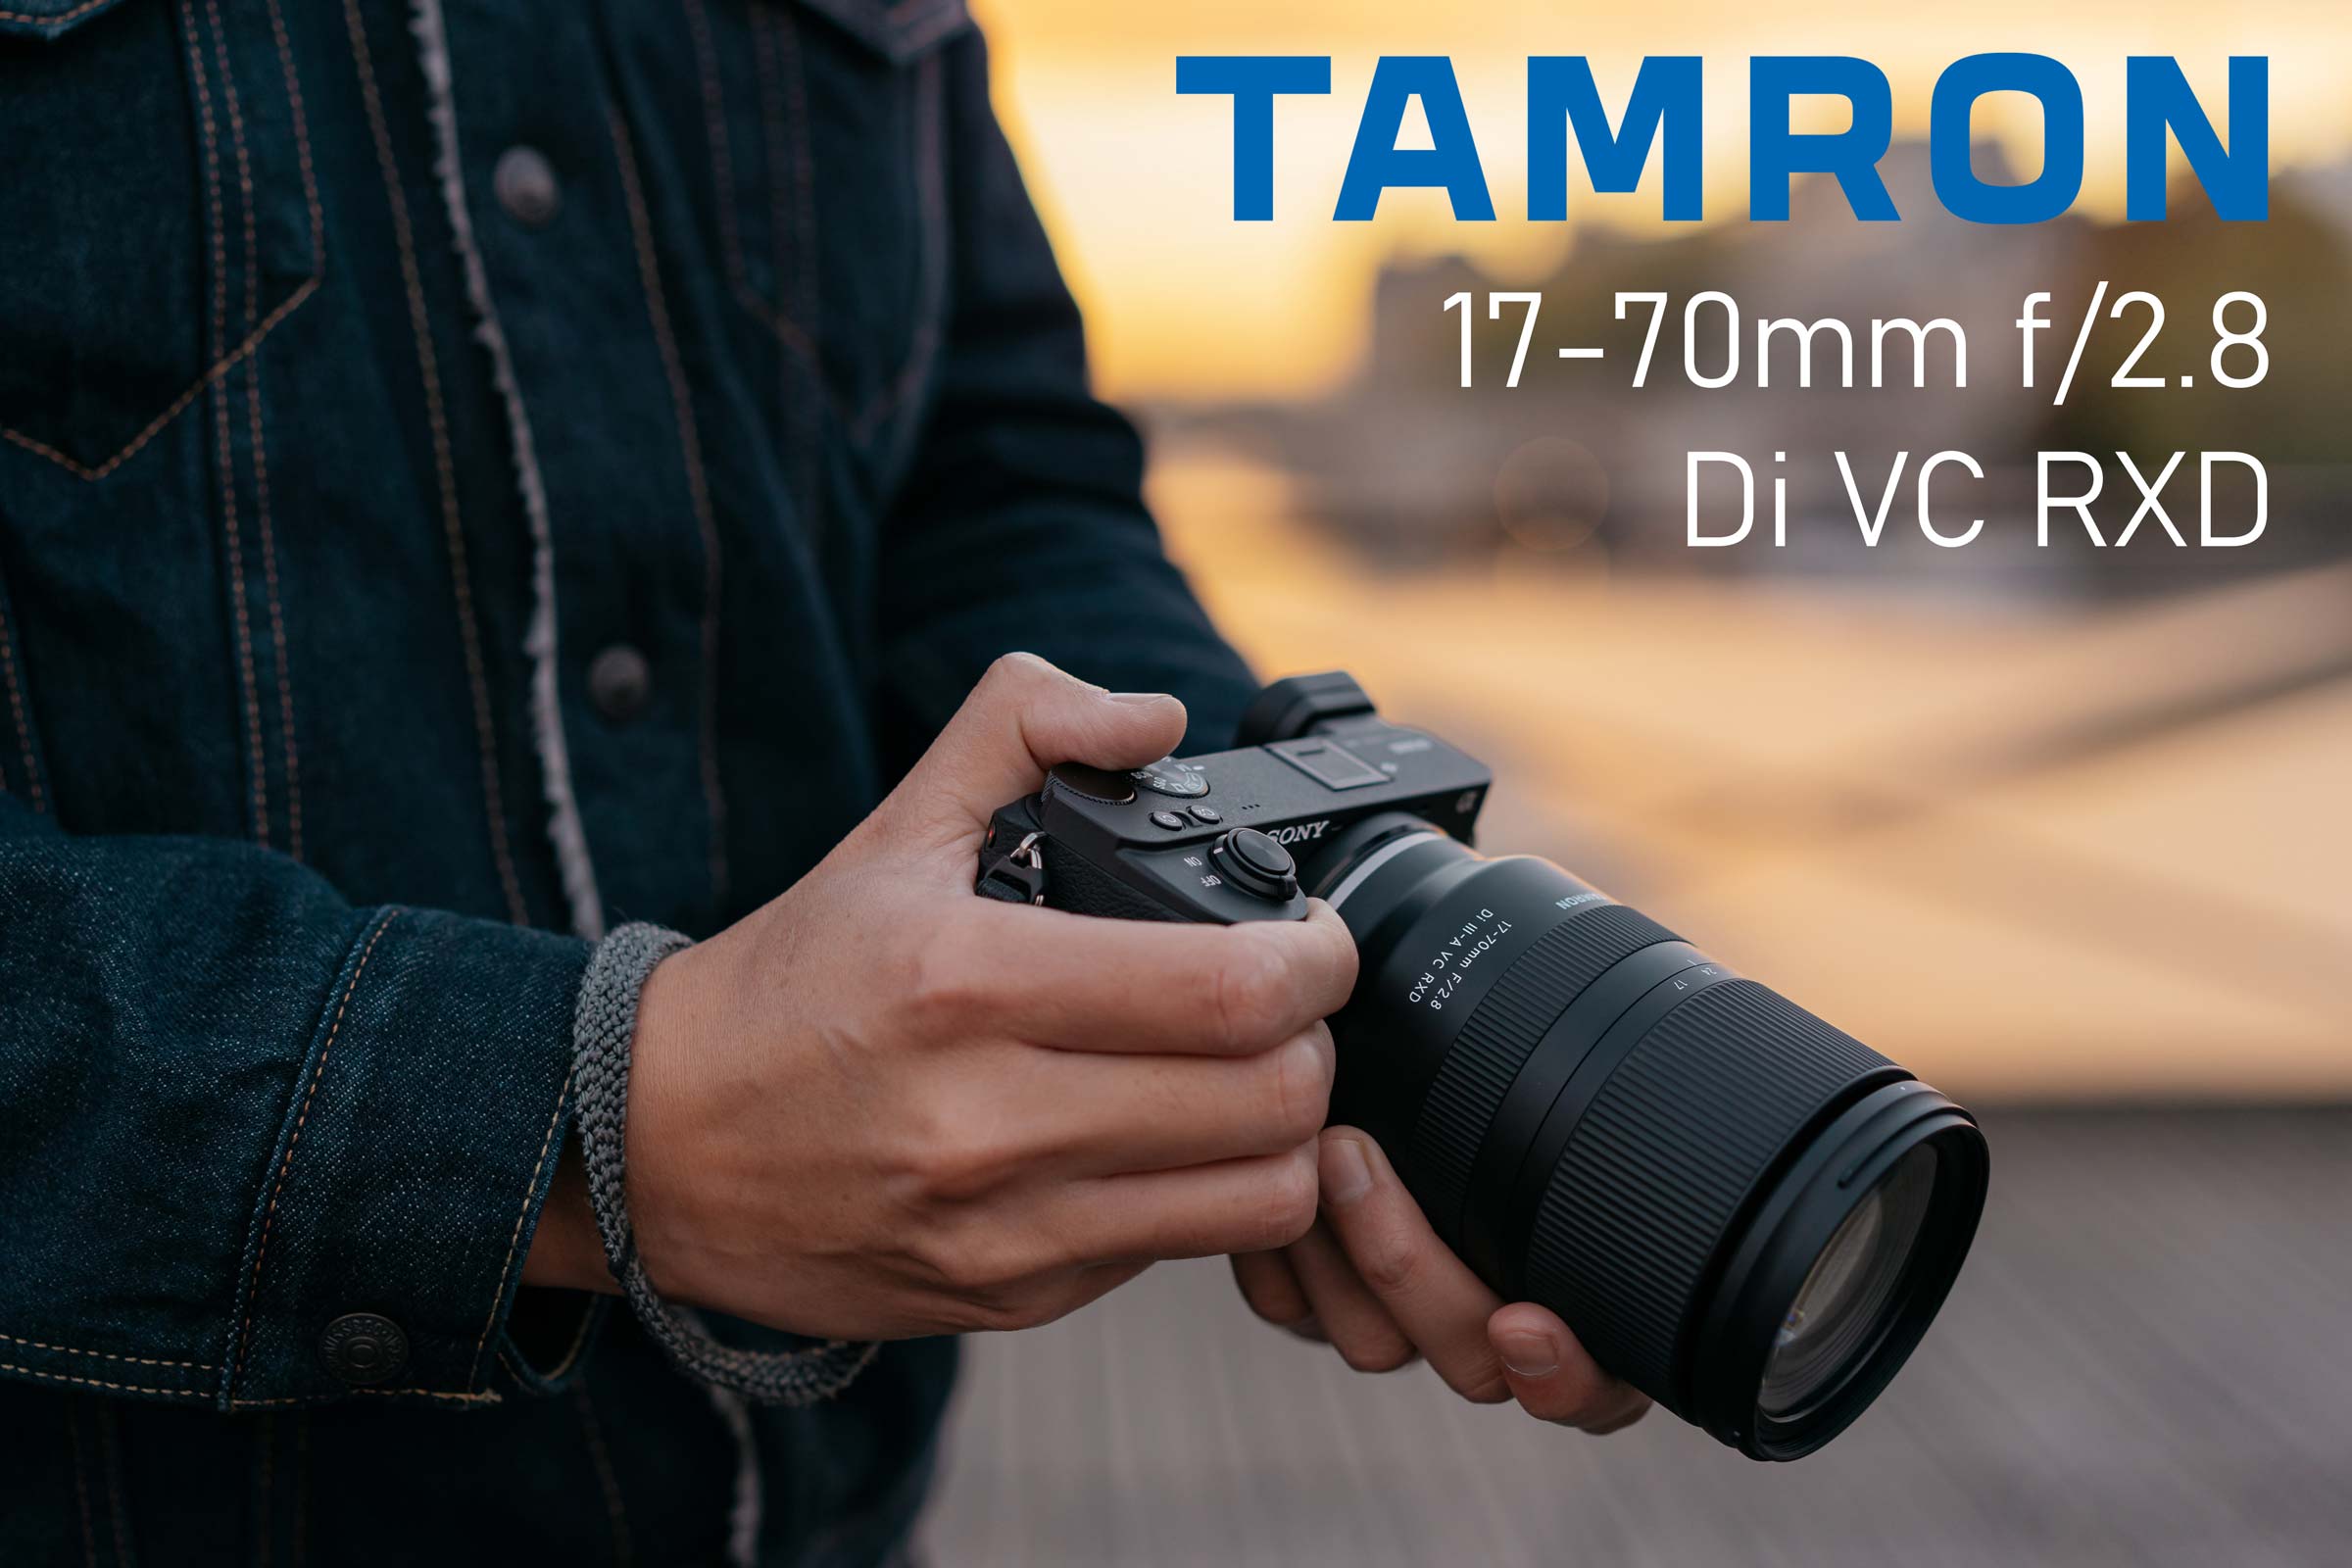 Tamron Announces 17-70mm f/2.8 Di III-A VC RXD Lens for Sony APS-C 